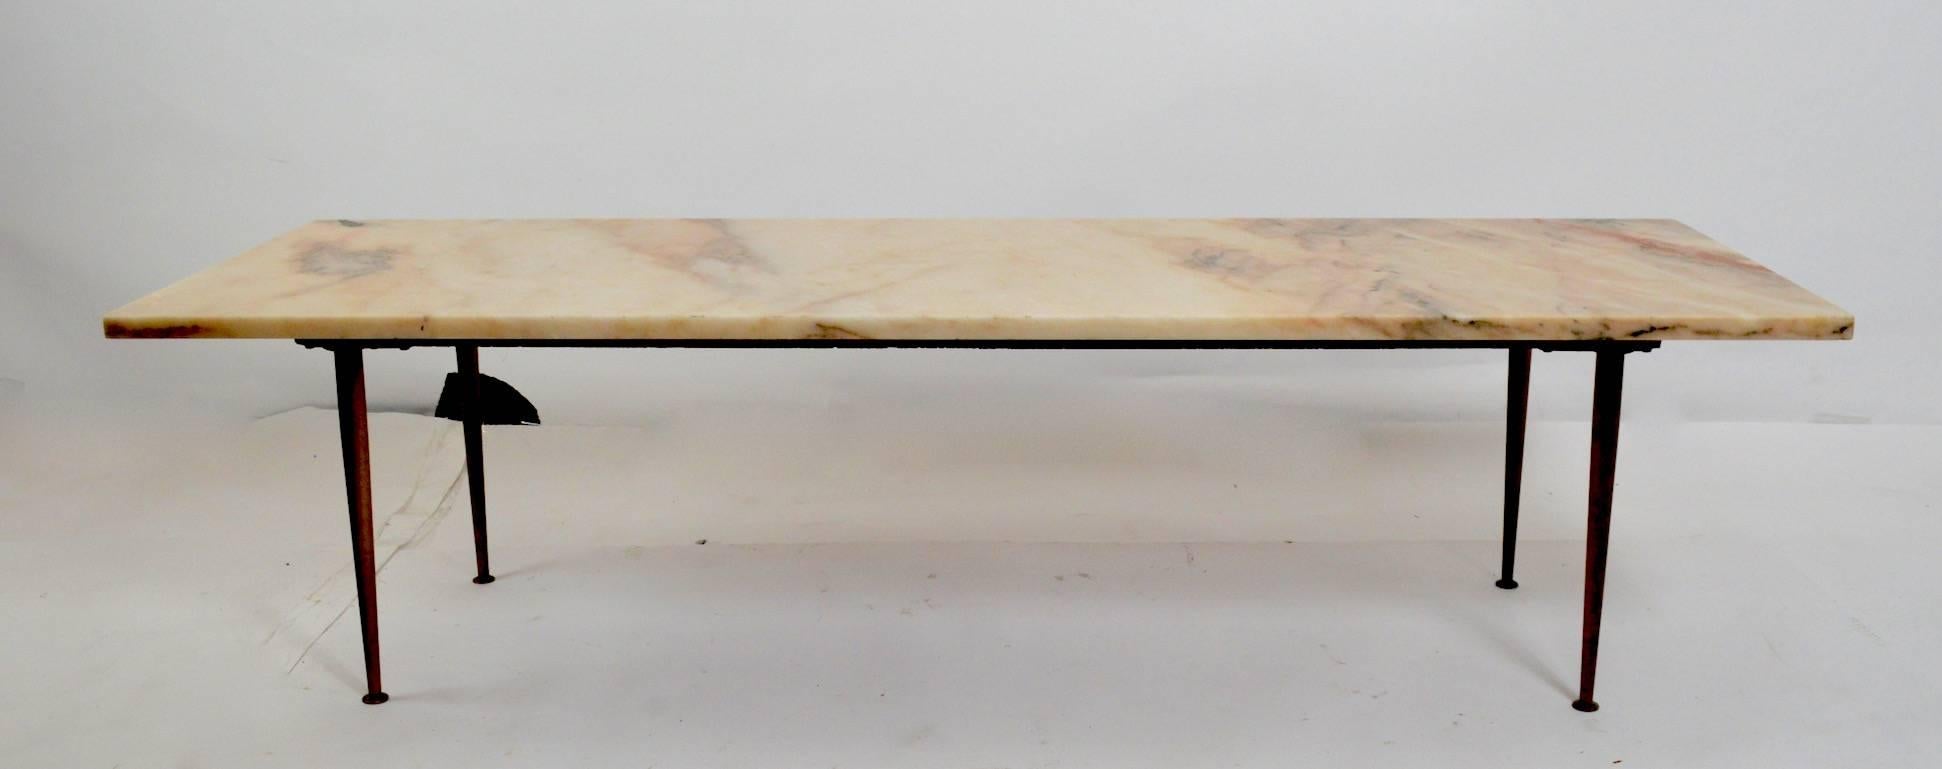 Rectangular marble-top coffee table with solid cast brass legs, probably Italian made, circa 1950-1960s. Measure: Marble 1 inch thick.